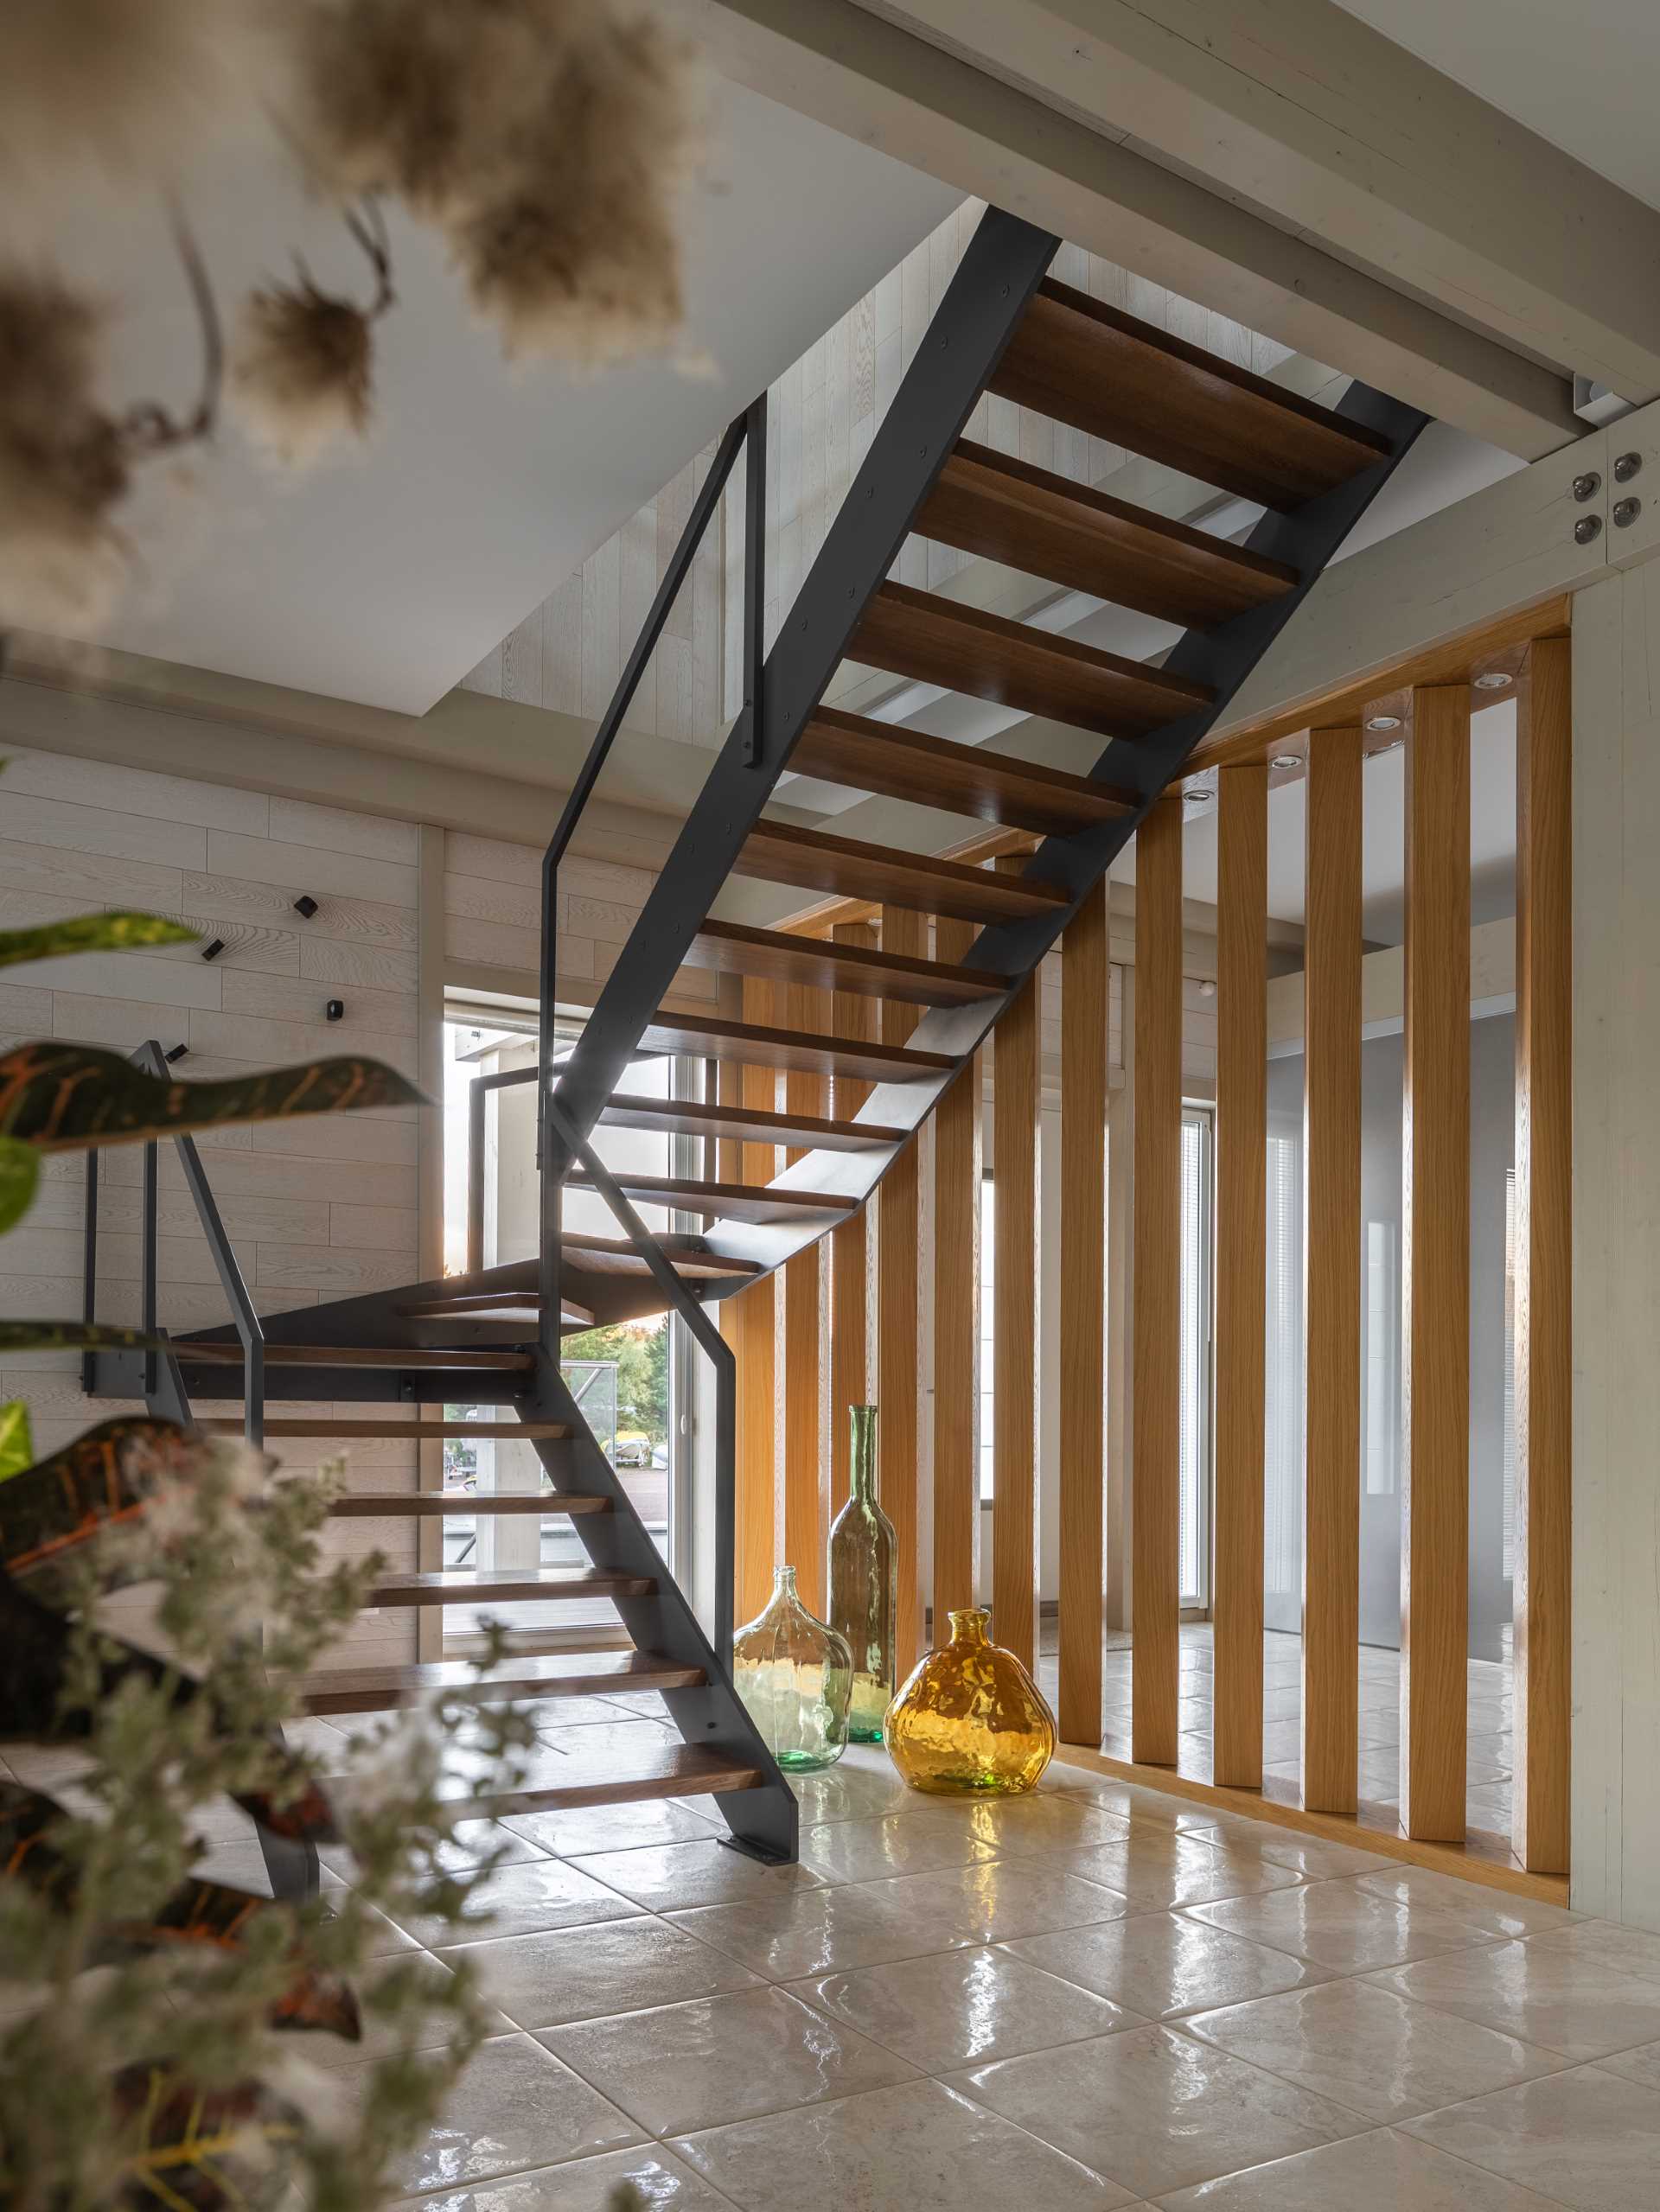 Steel and wood stairs connect the main floor with the upper floor of this ،me.